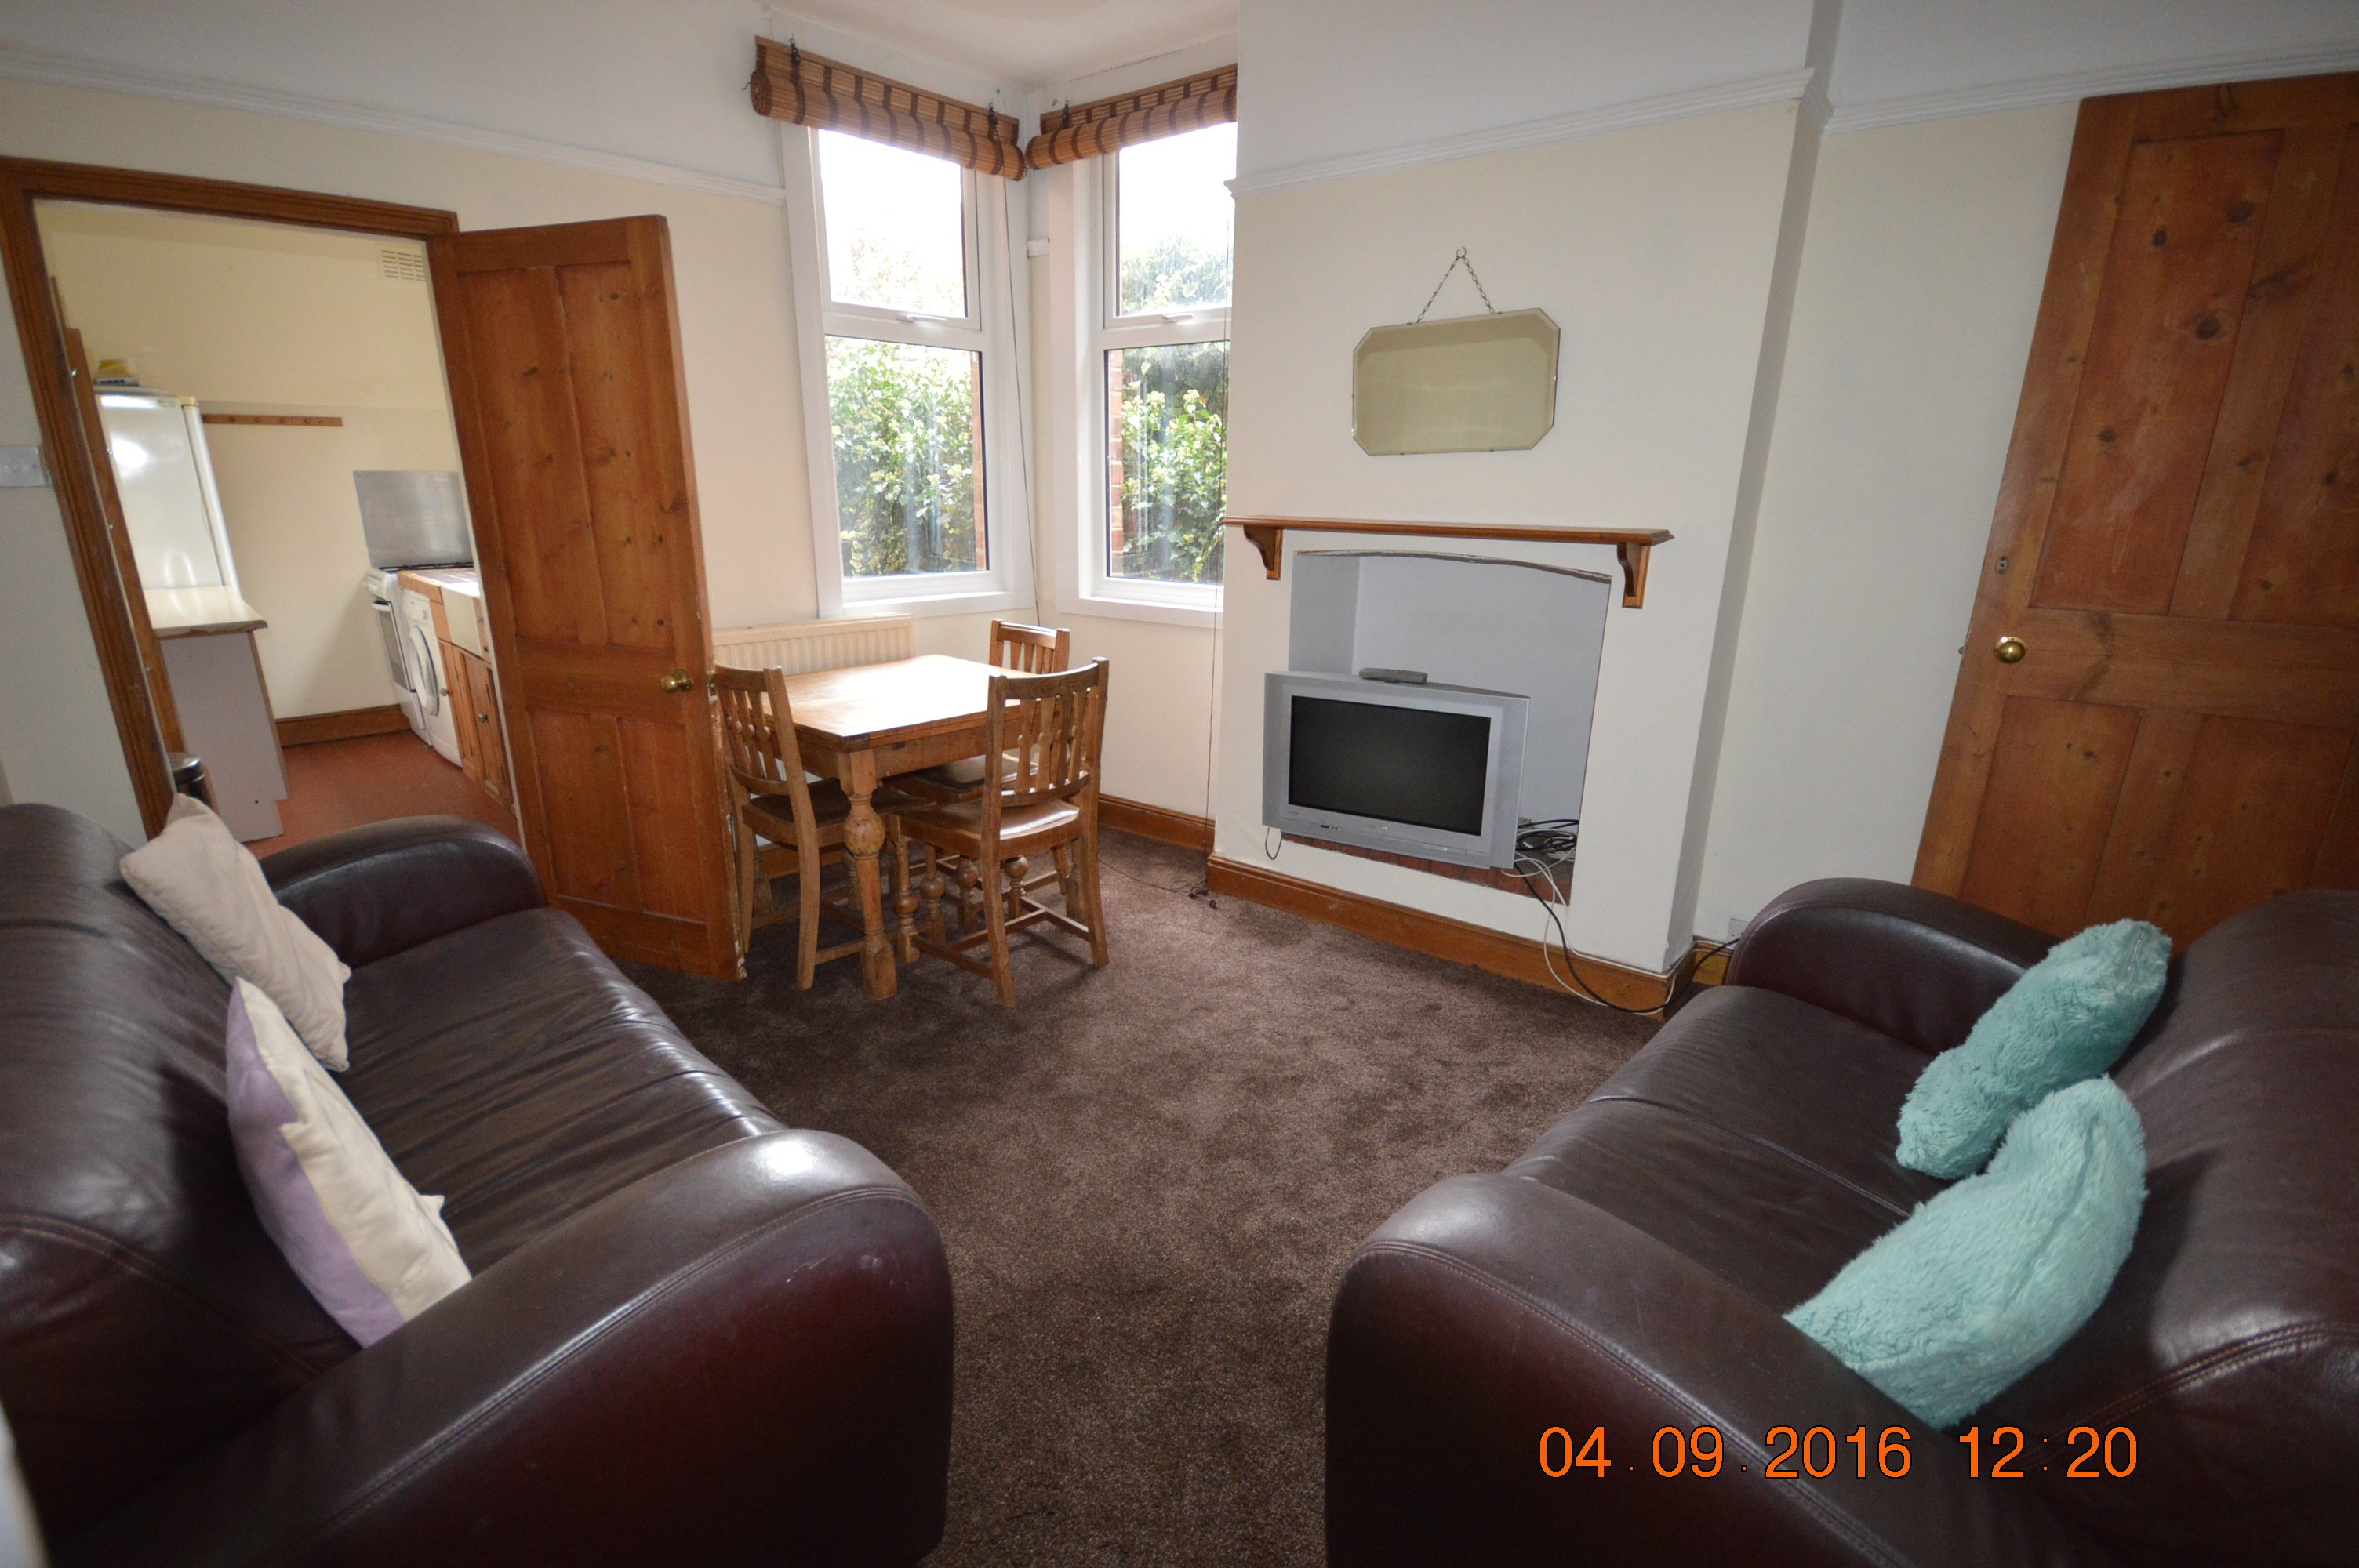 3 Bedrooms End terrace house to rent in St. Leonards Road Clarendon Park, Leicester LE2